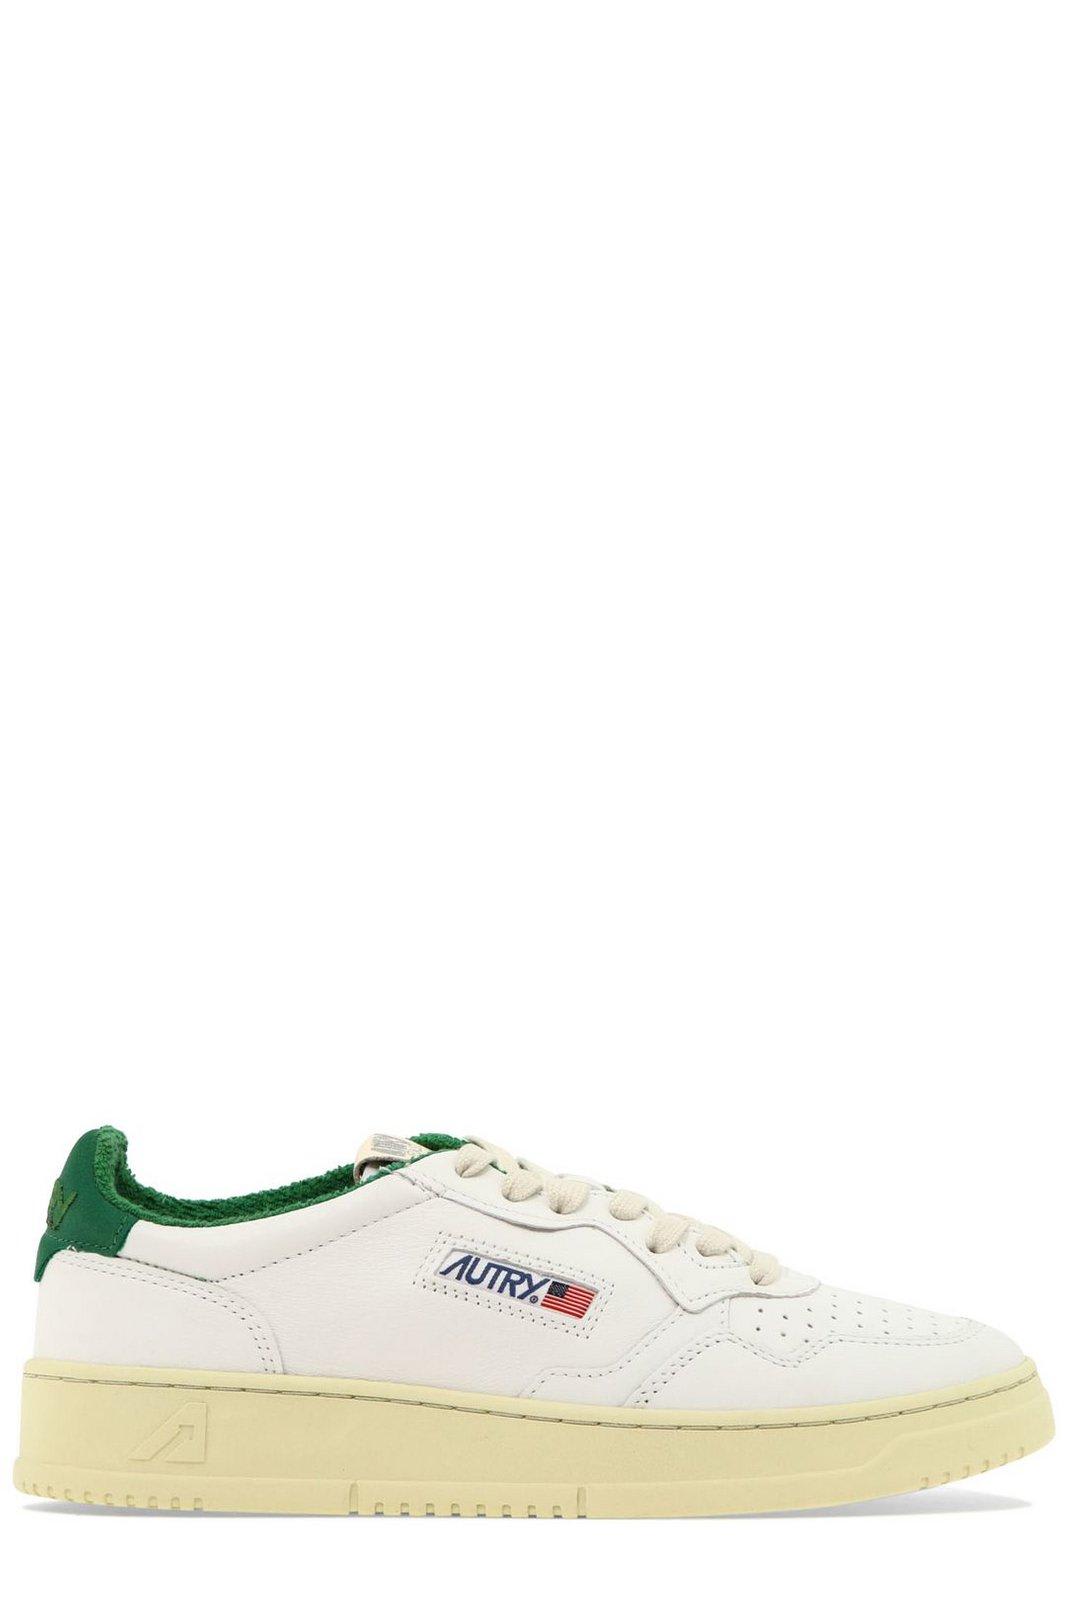 Shop Autry Medalist 01 Lace-up Sneakers In Bianco E Verde